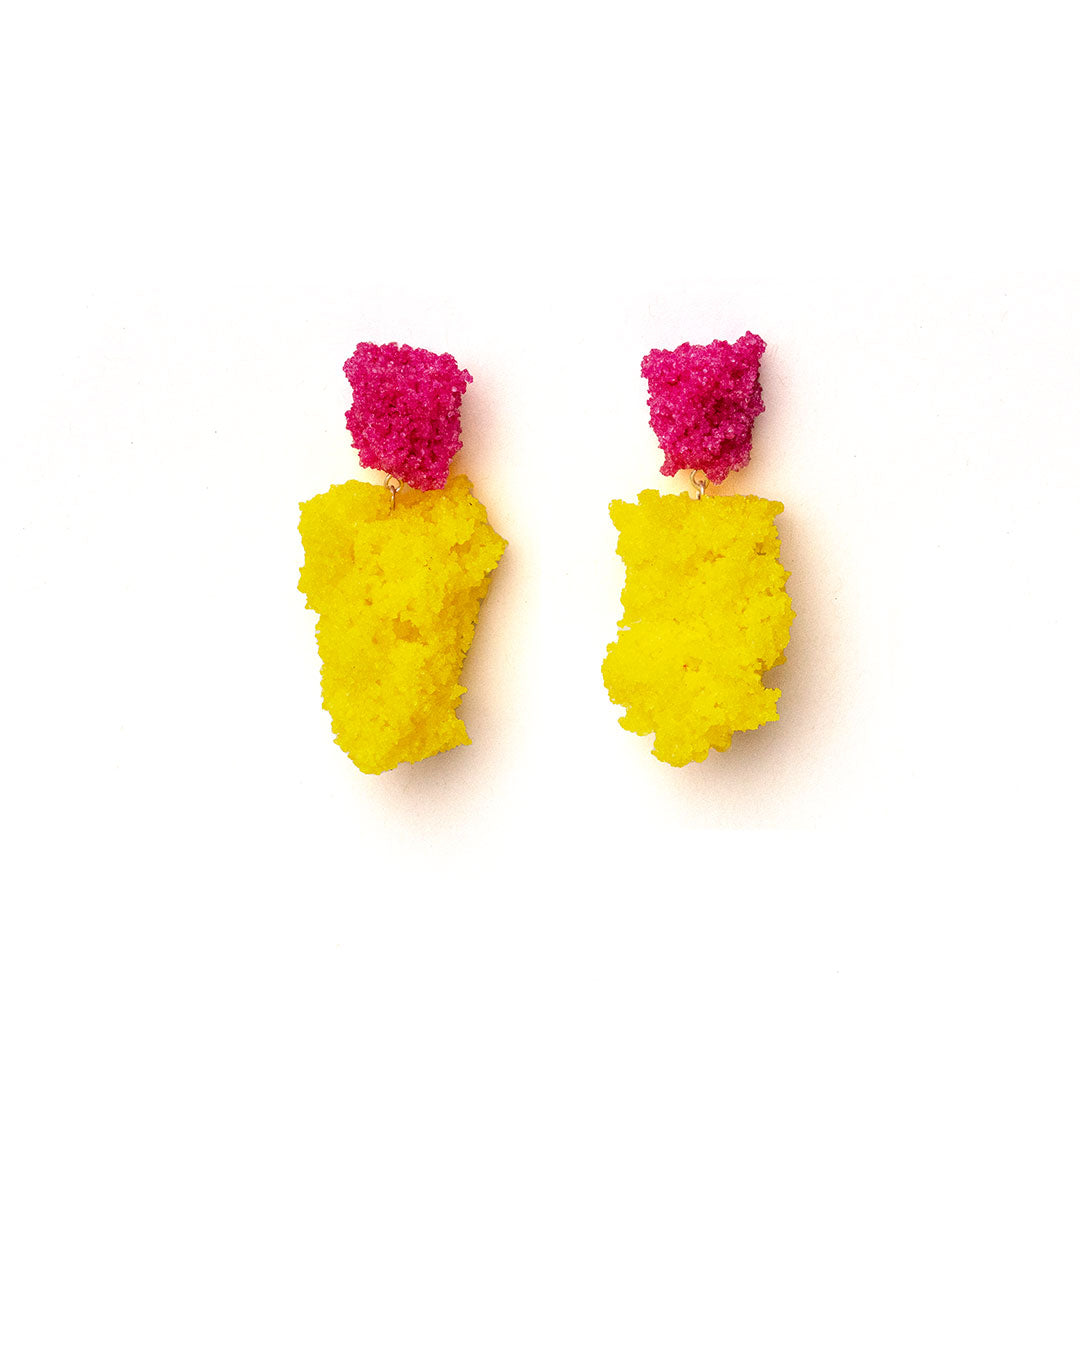 Double Sugar Earrings - Pink and yellow - Carla Movia